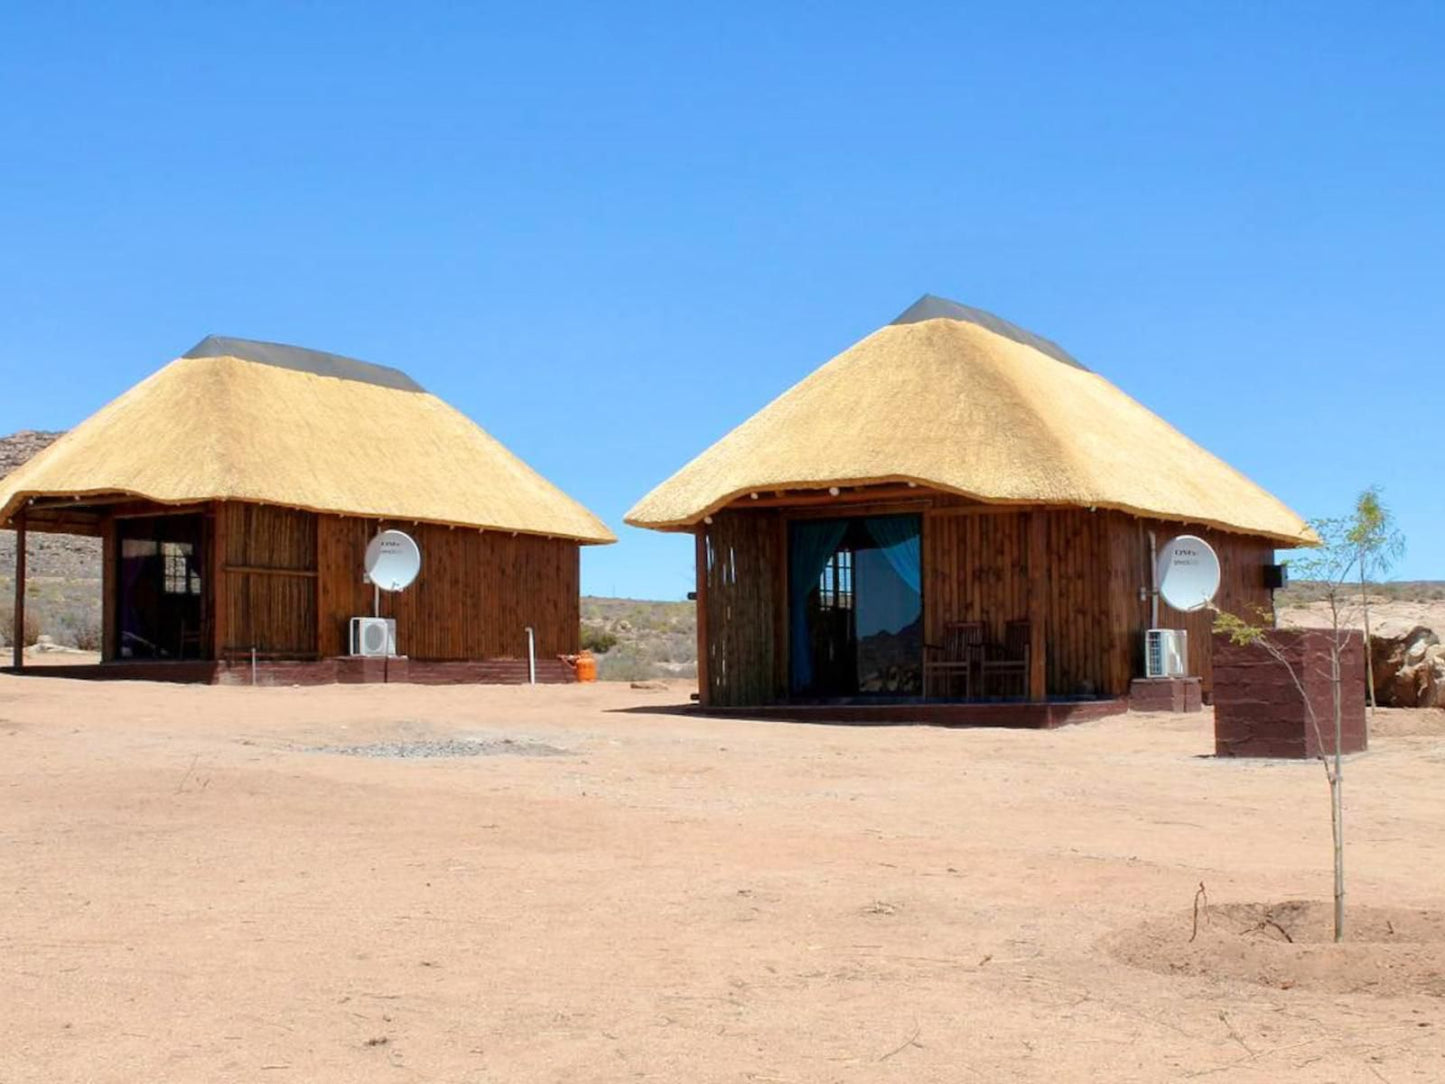 Sperrgebiet Lodge Springbok Northern Cape South Africa Complementary Colors, Colorful, Desert, Nature, Sand